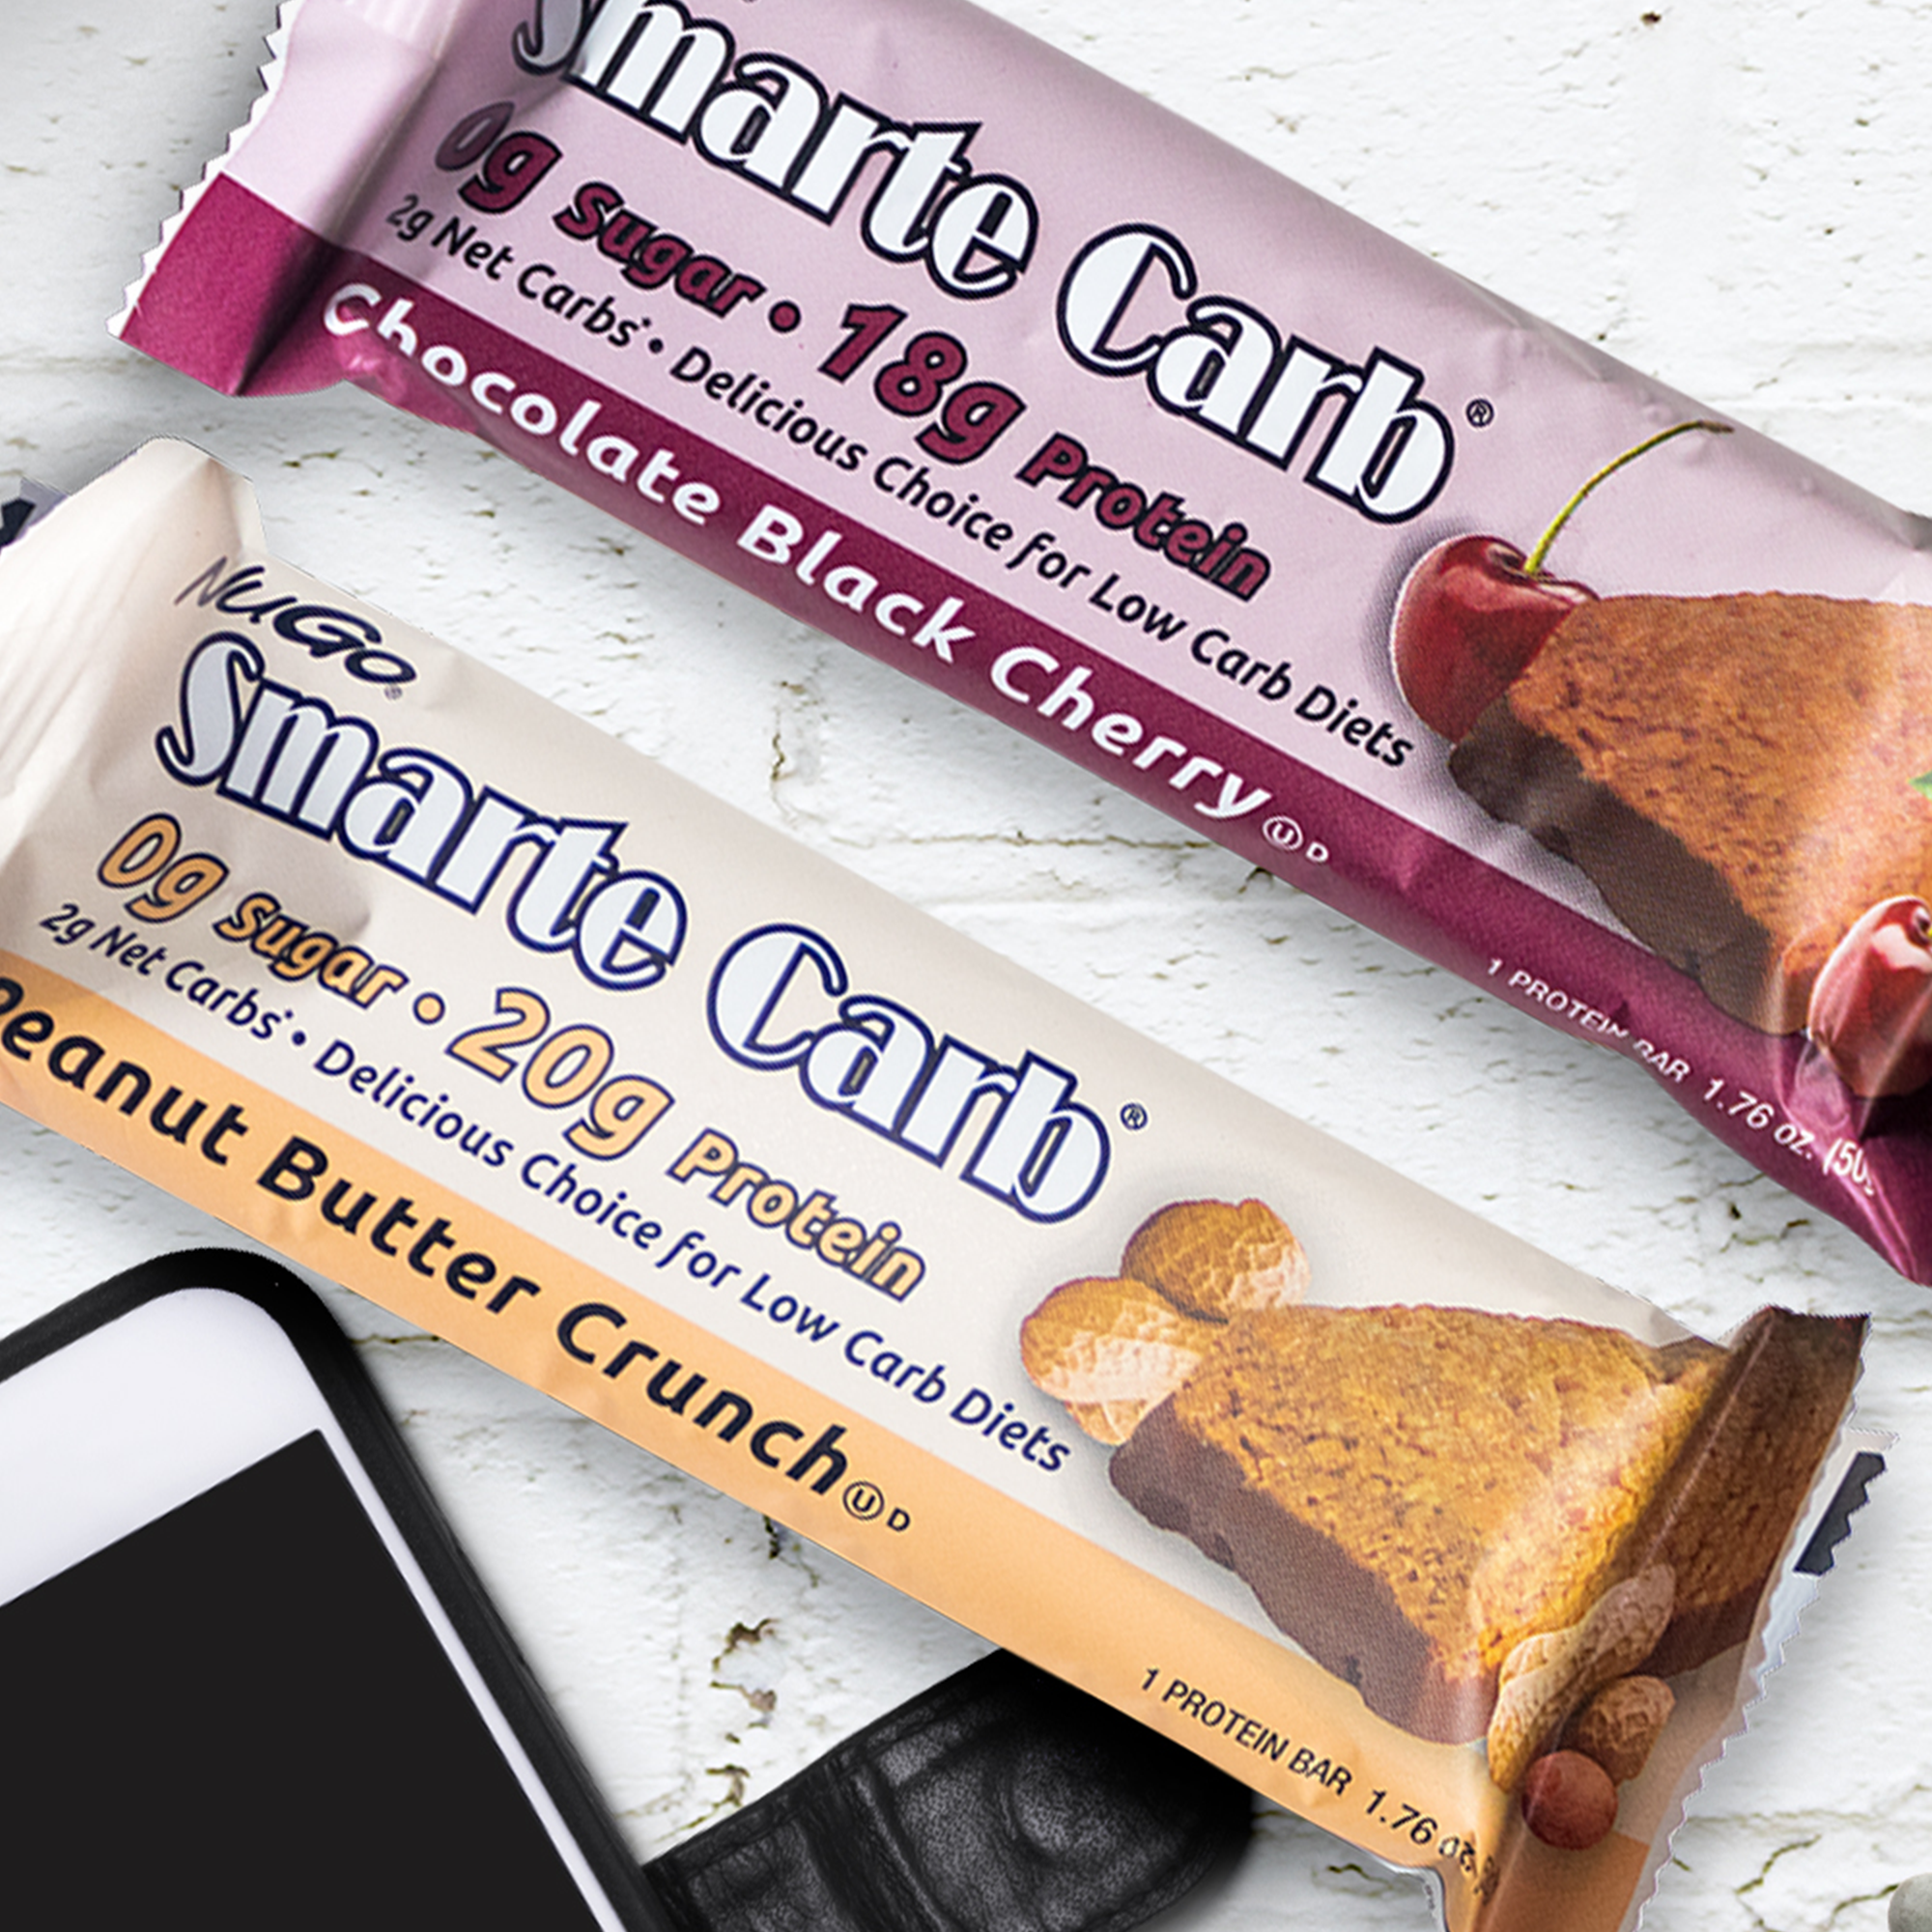 Smarte Carb Chocolate Black Cherry and Peanut Butter Crunch bars close up